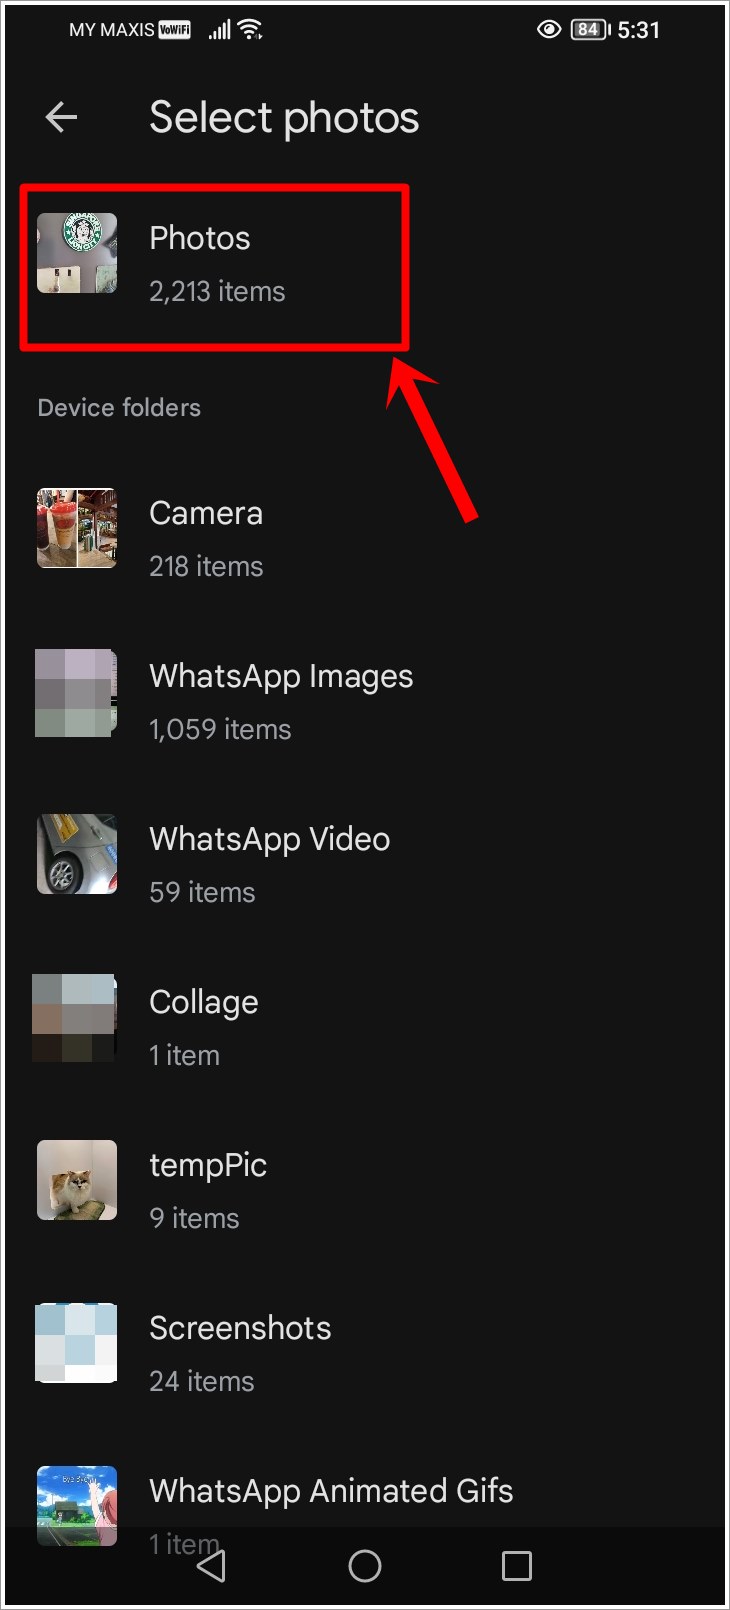 This is a screenshot of 'Select Photos' page on an Android phone with the 'Photos' section and the number of photos saved in Google Photos highlighted.